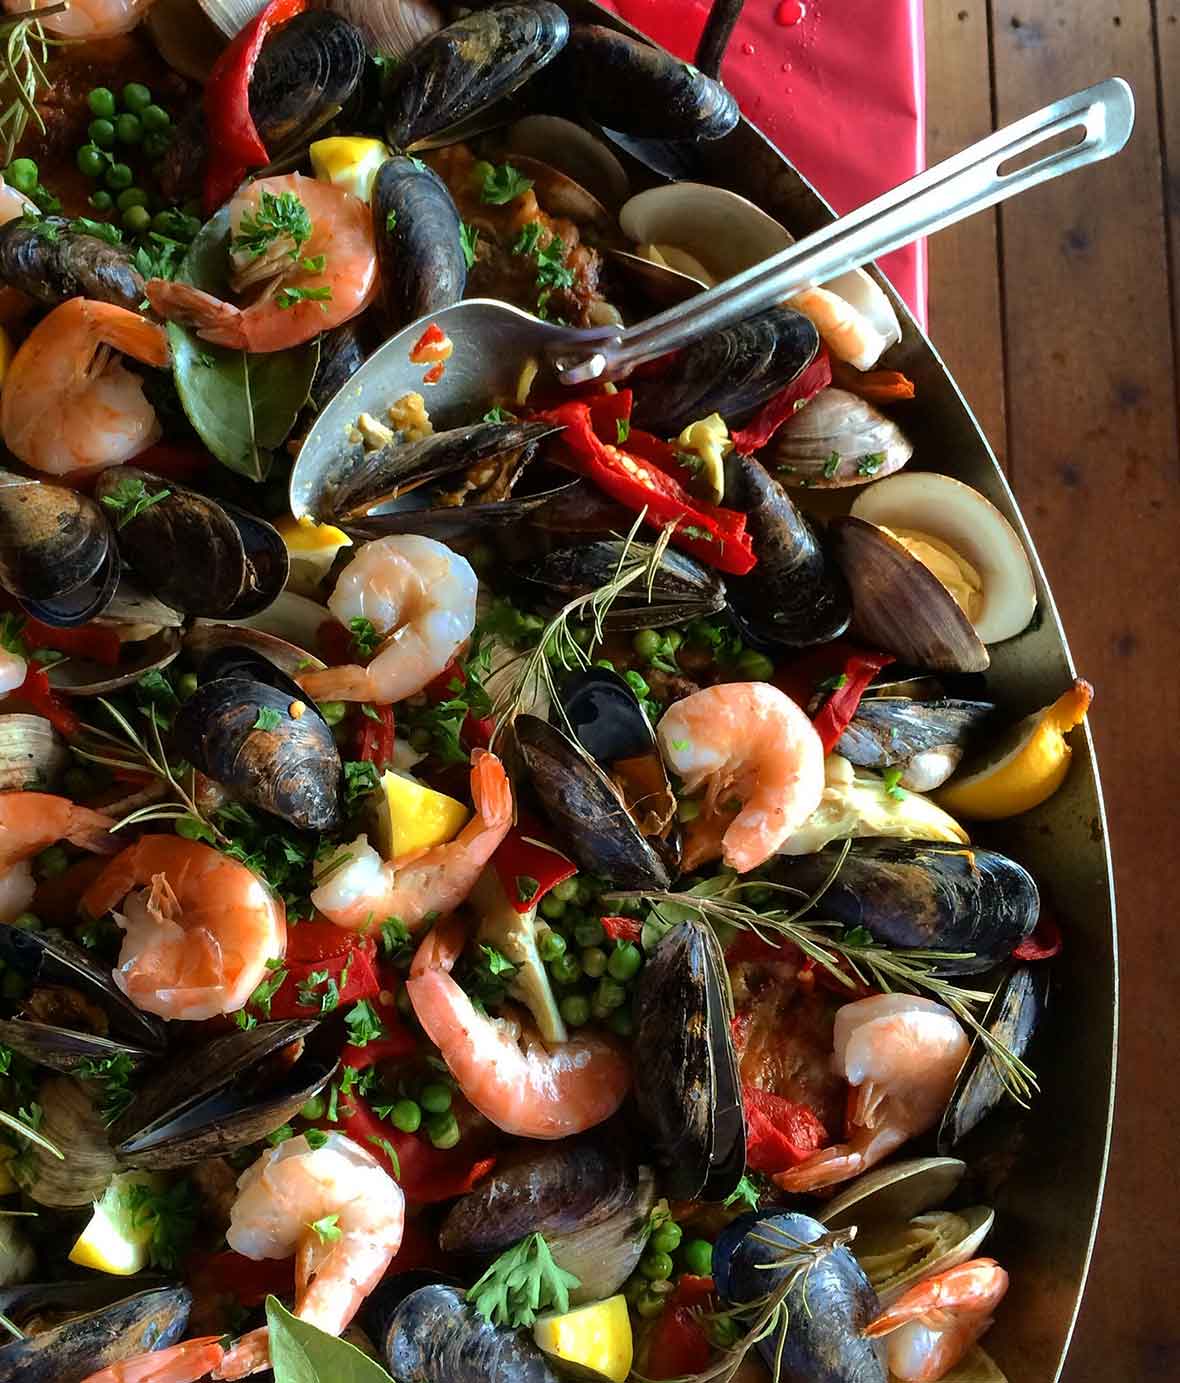 A large Dutch oven full of shrimp, mussels, red peppers, peas, lemon slices, parsley, bay leaves, and onion with a serving spoon.